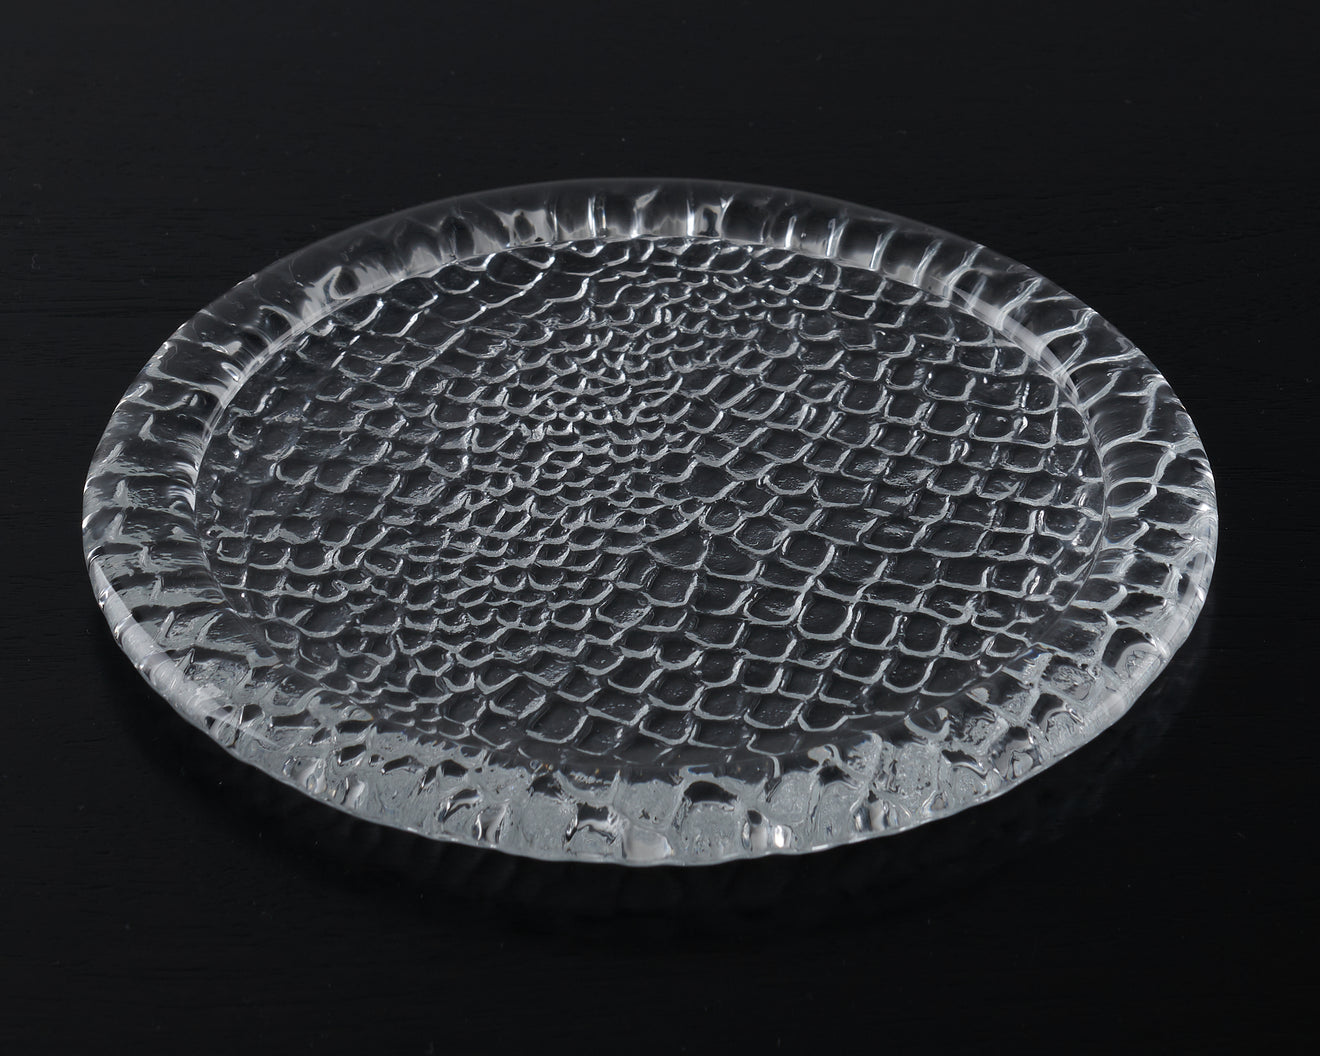 GUCCI PROTOTYPE GLASS TRAY WITH ALLIGATOR TEXTURE